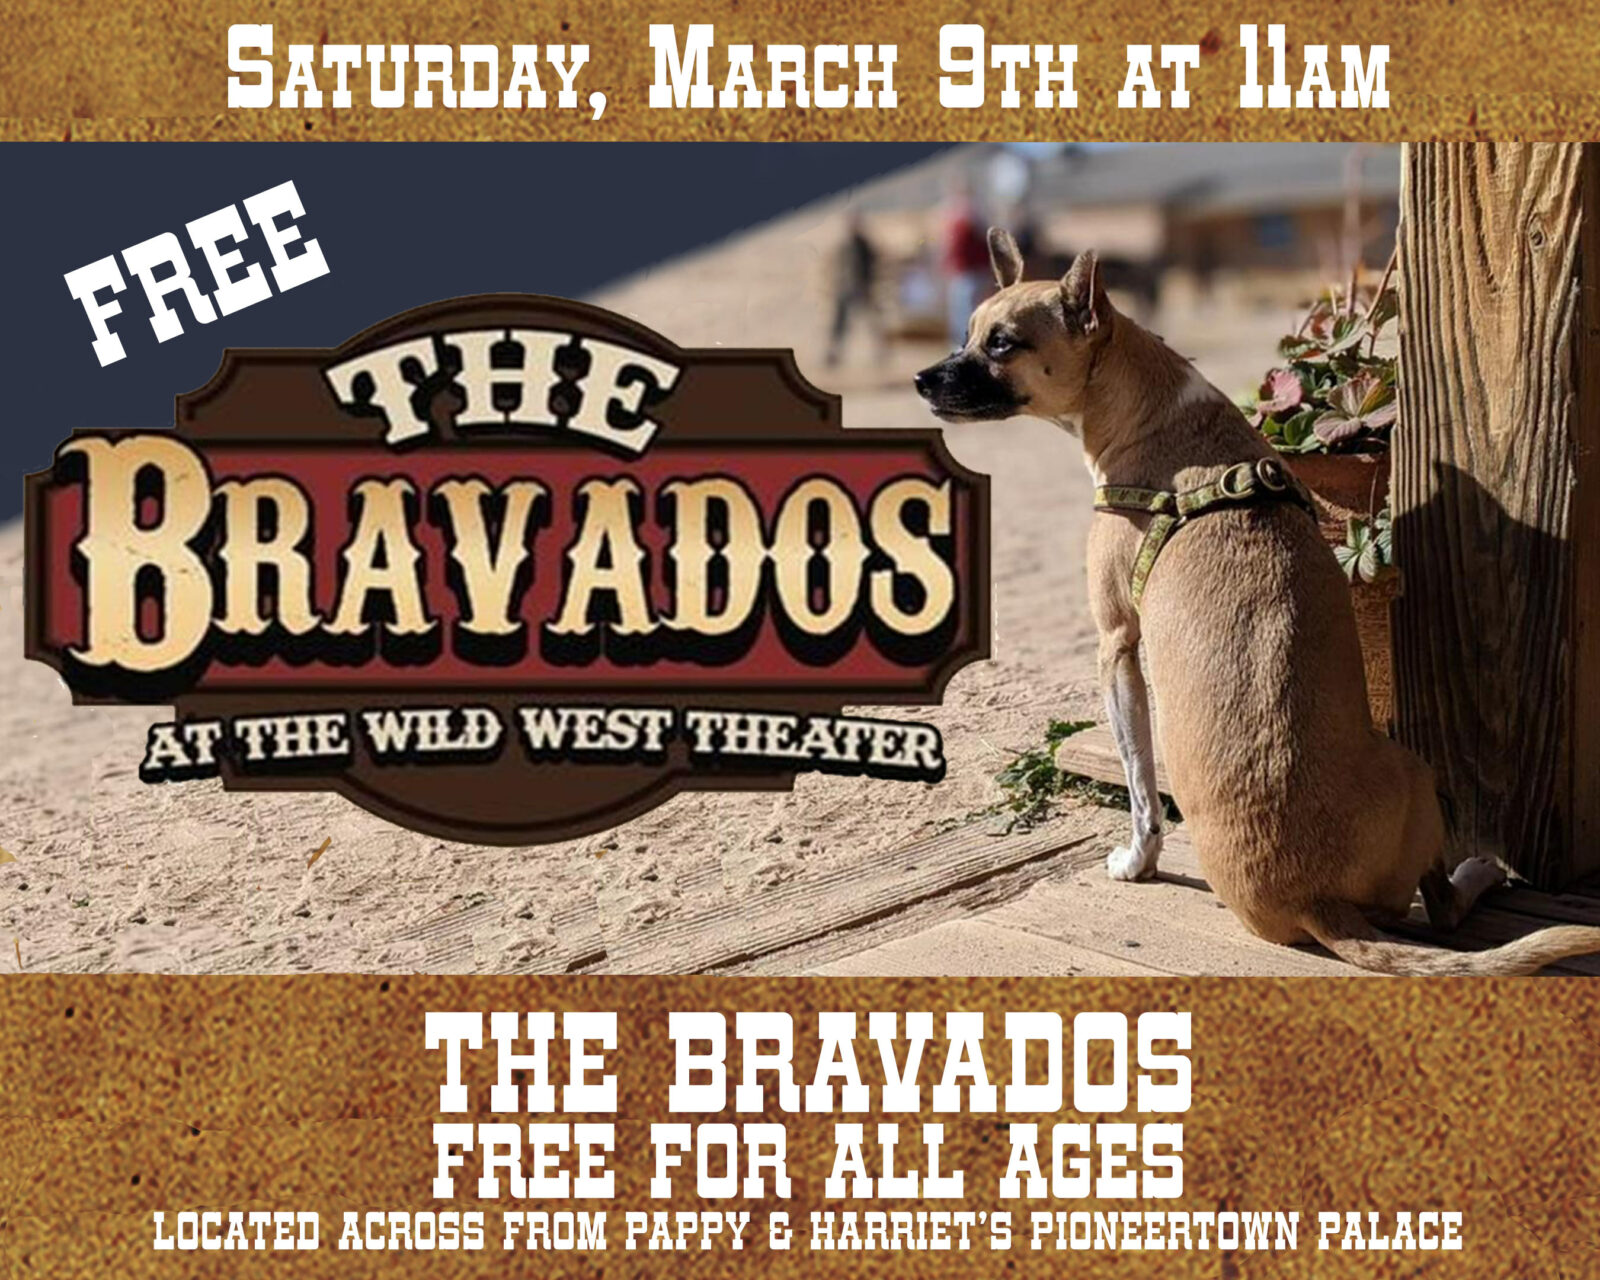 Bravados stunt show. Free to all ages. Across from Pappy and Harriet's Pioneertown Palace/